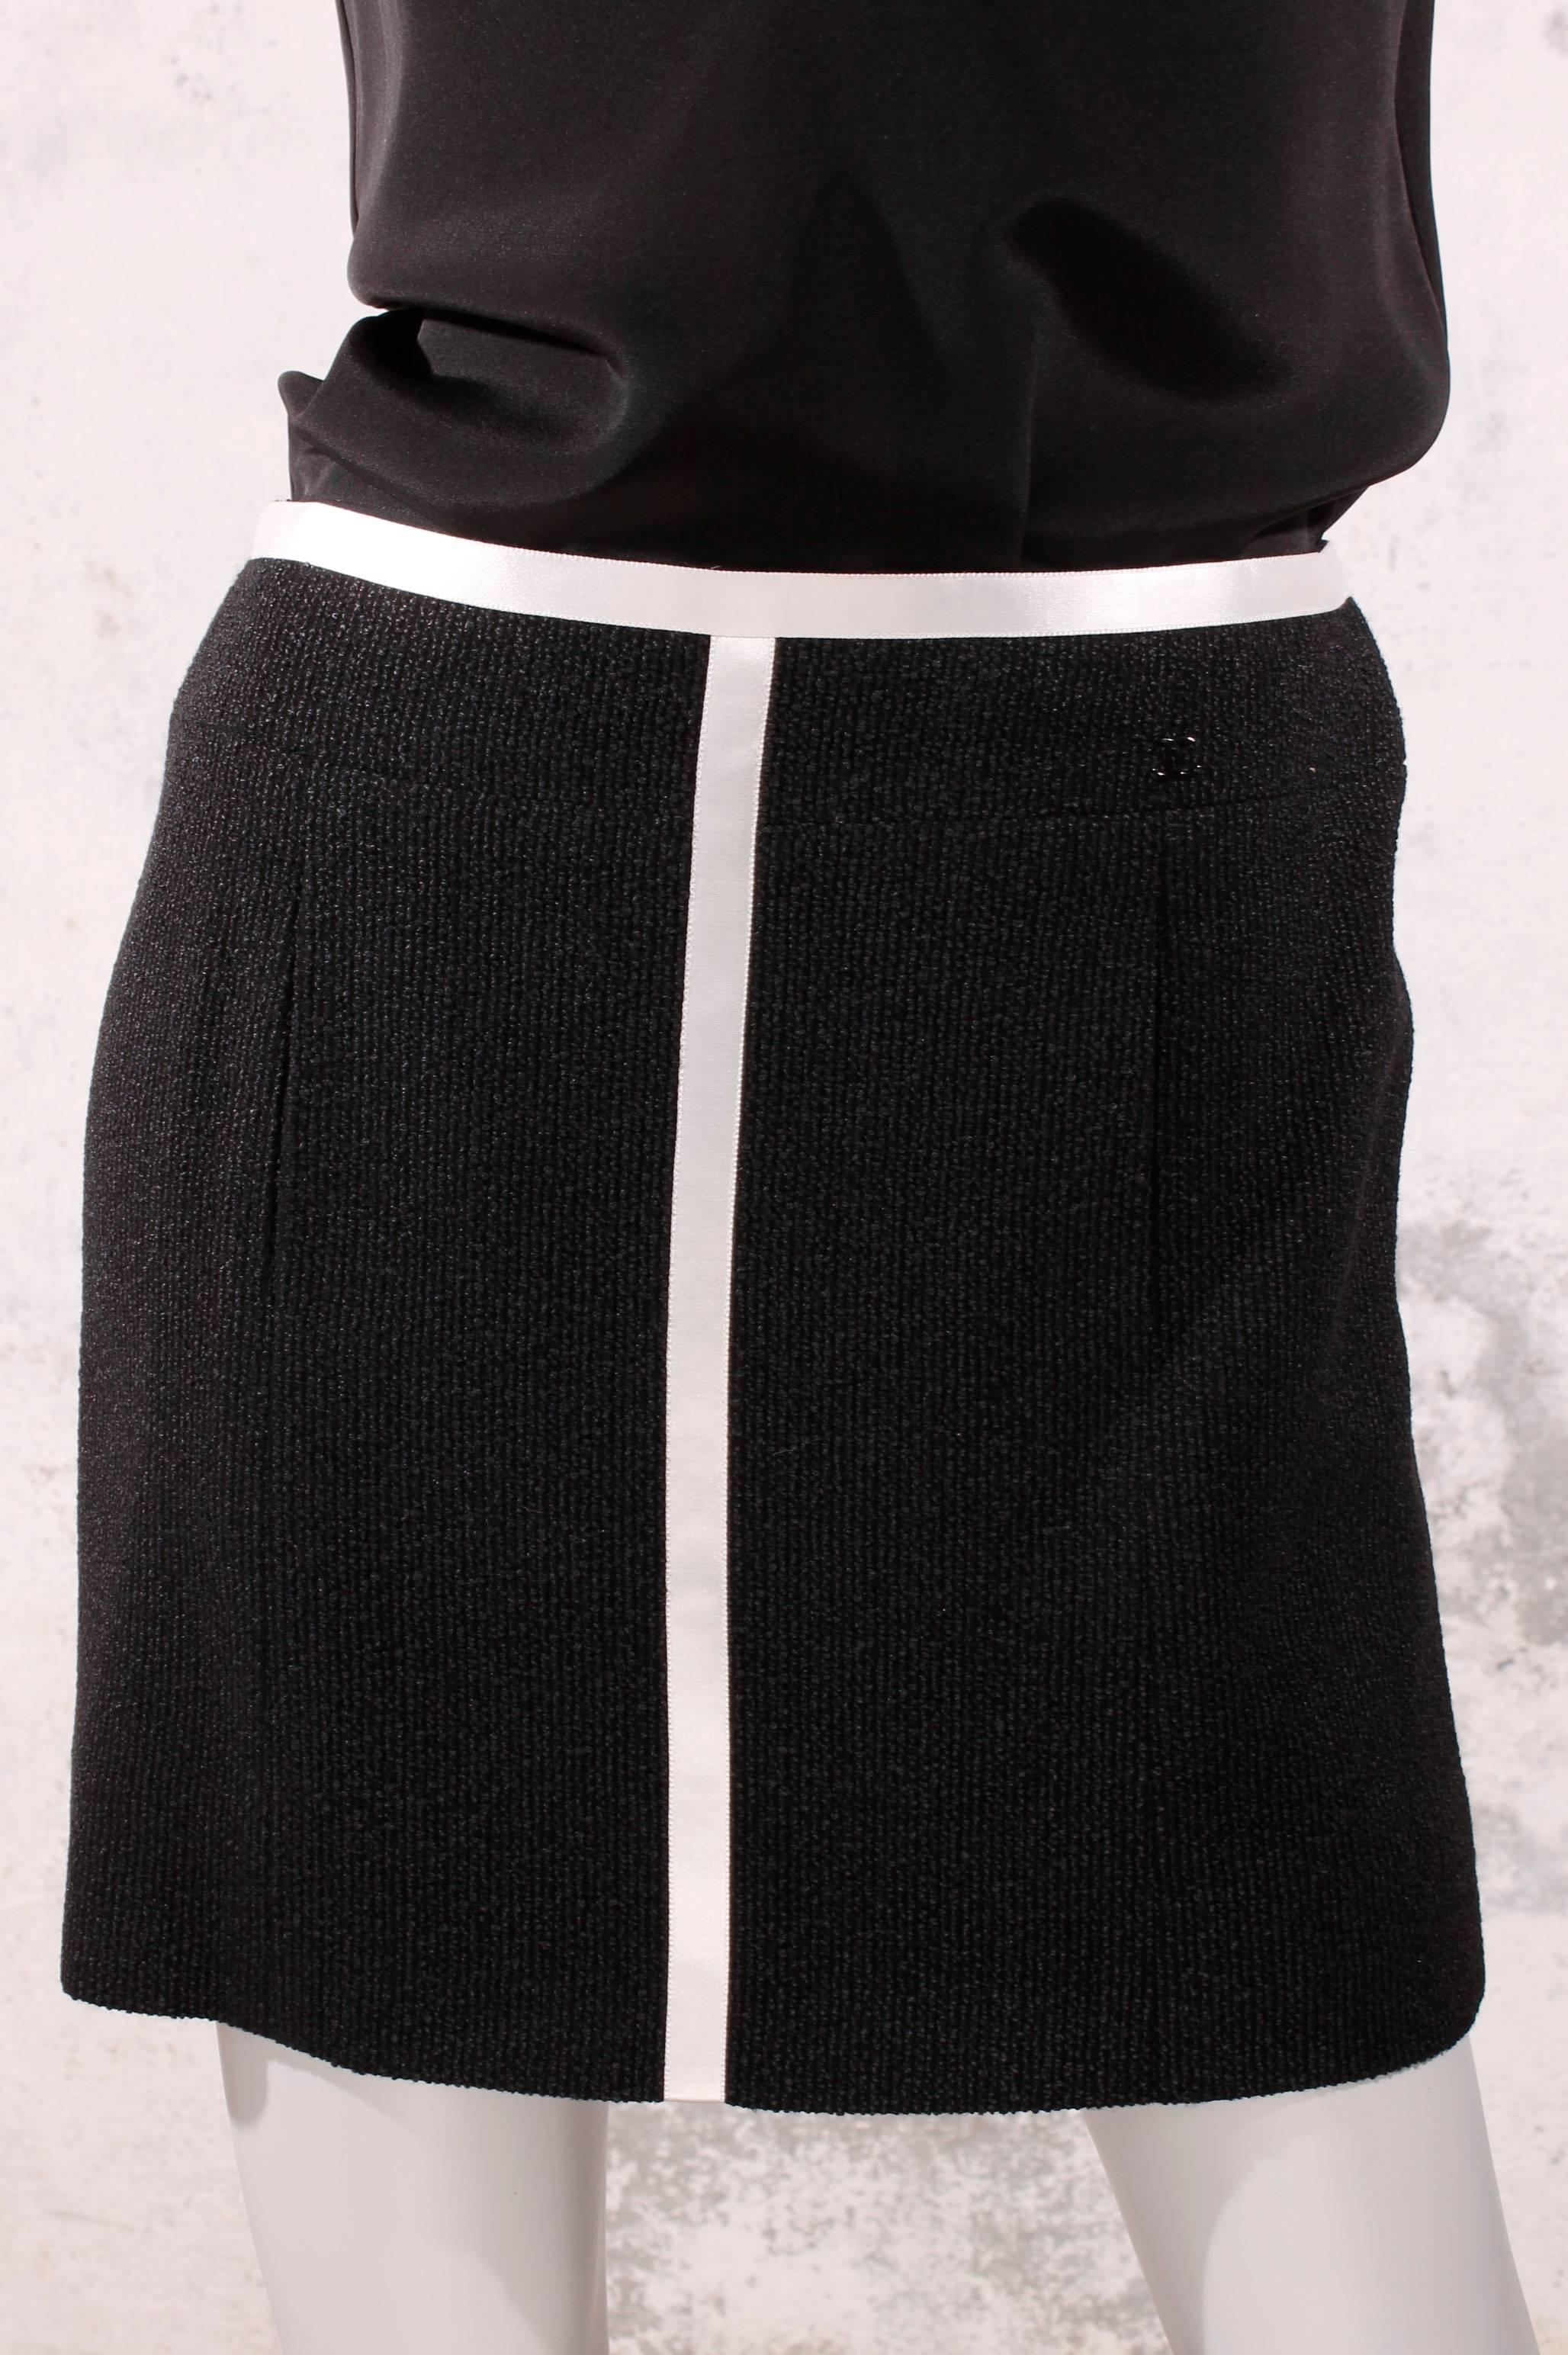 Women's Chanel Jacket and Skirt - Black & White For Sale